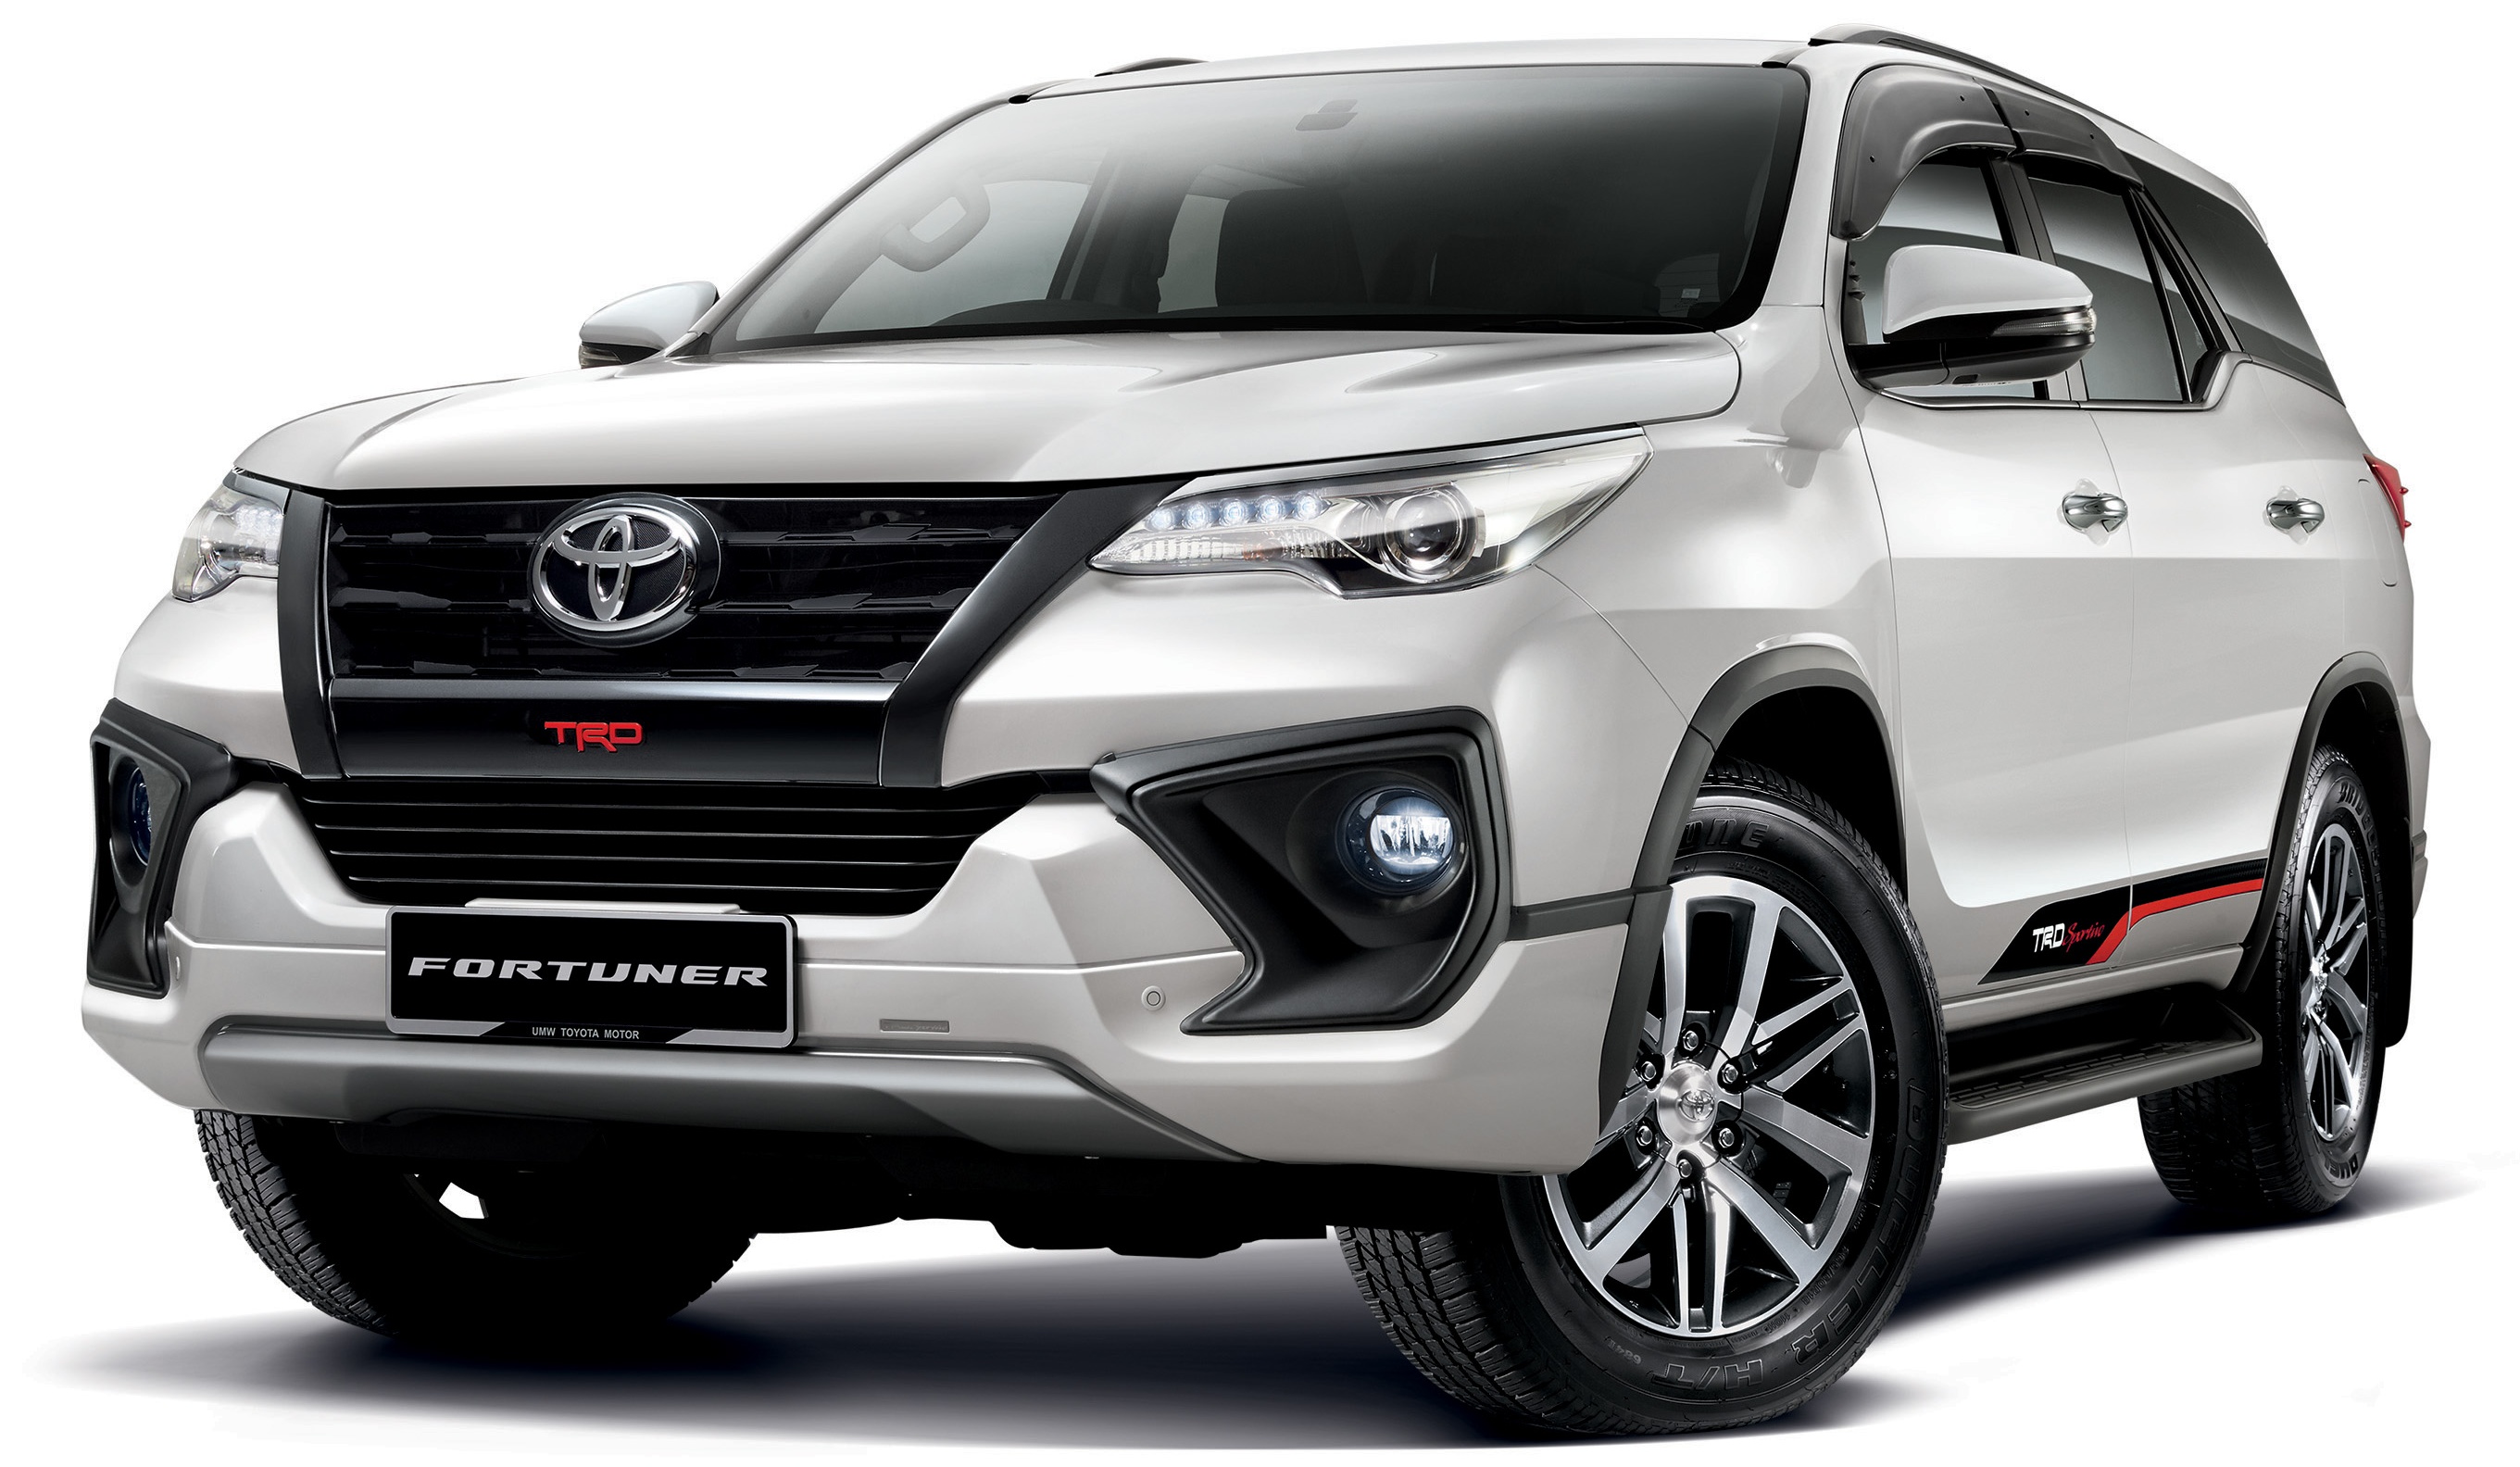 Toyota Fortuner Updated Now On Sale New 2 4 Vrz 4x2 And 4x4 From Rm186k Standard Rear Disc Brakes Paultan 